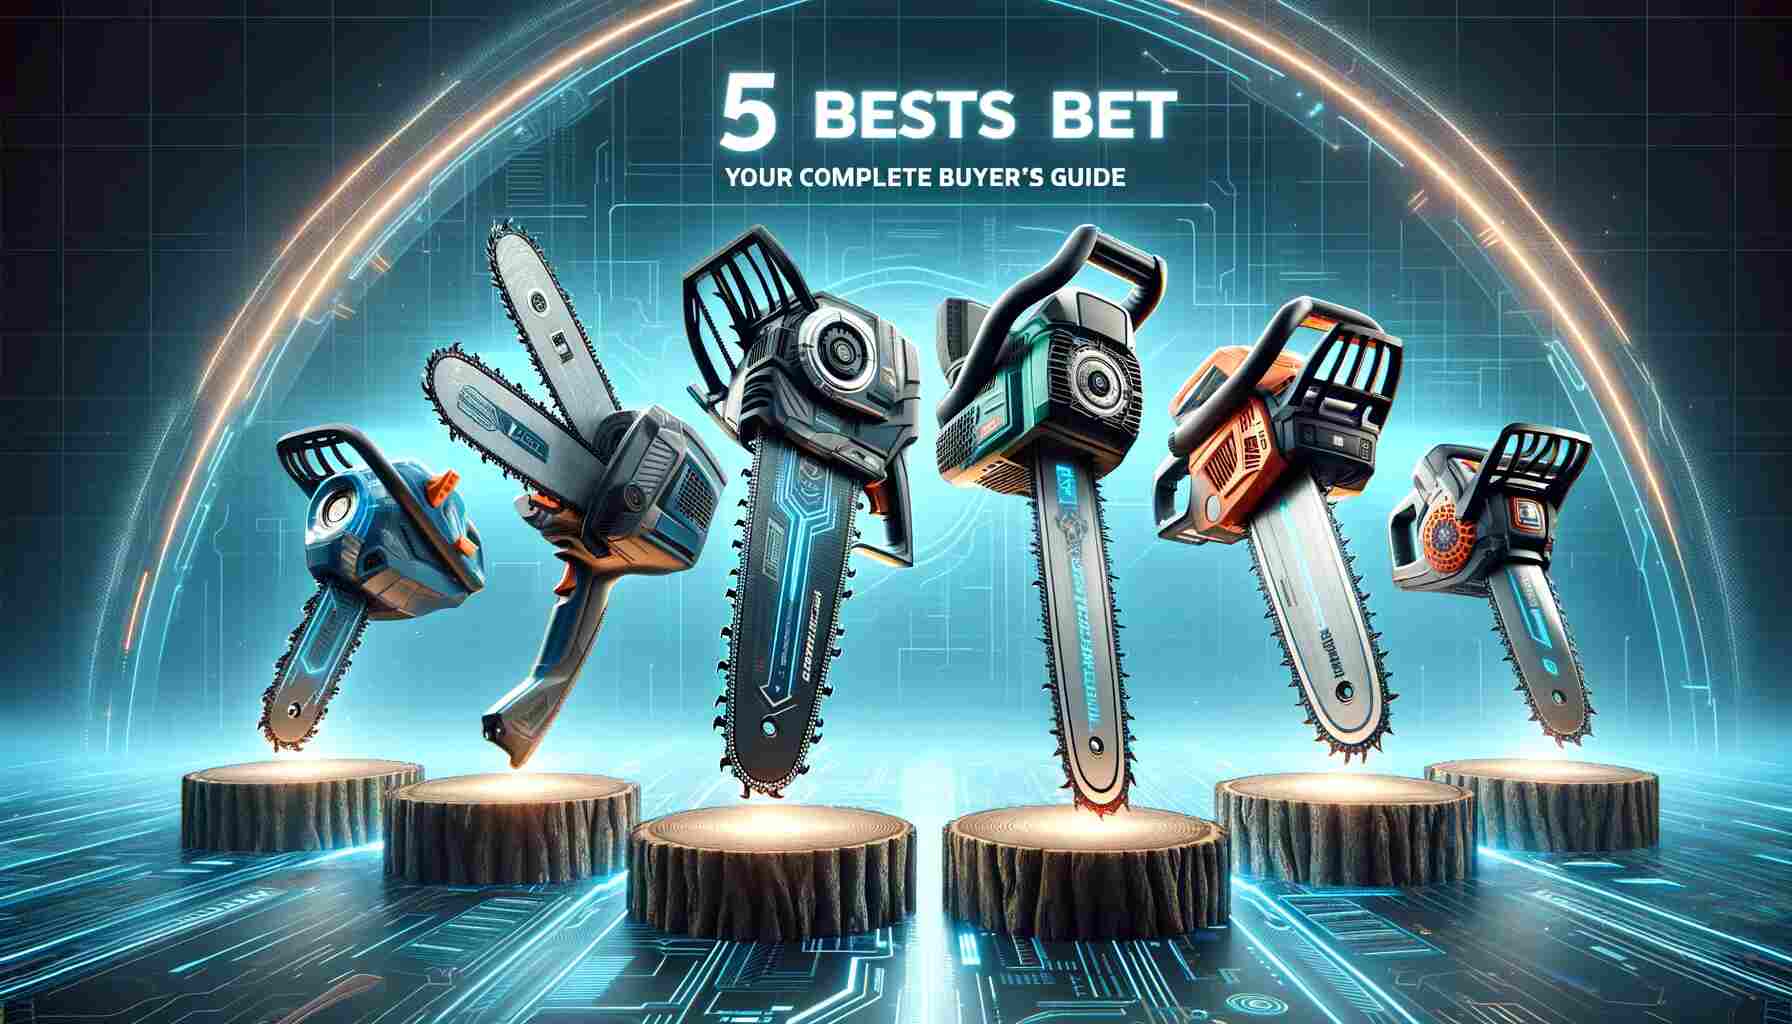 Here is the featured image for the 5 Best Battery-Powered Chainsaws in 2024: Your Complete Buyer's Guide. It showcases five modern, sleek battery-powered chainsaws, each with a distinct design, set against a futuristic background.